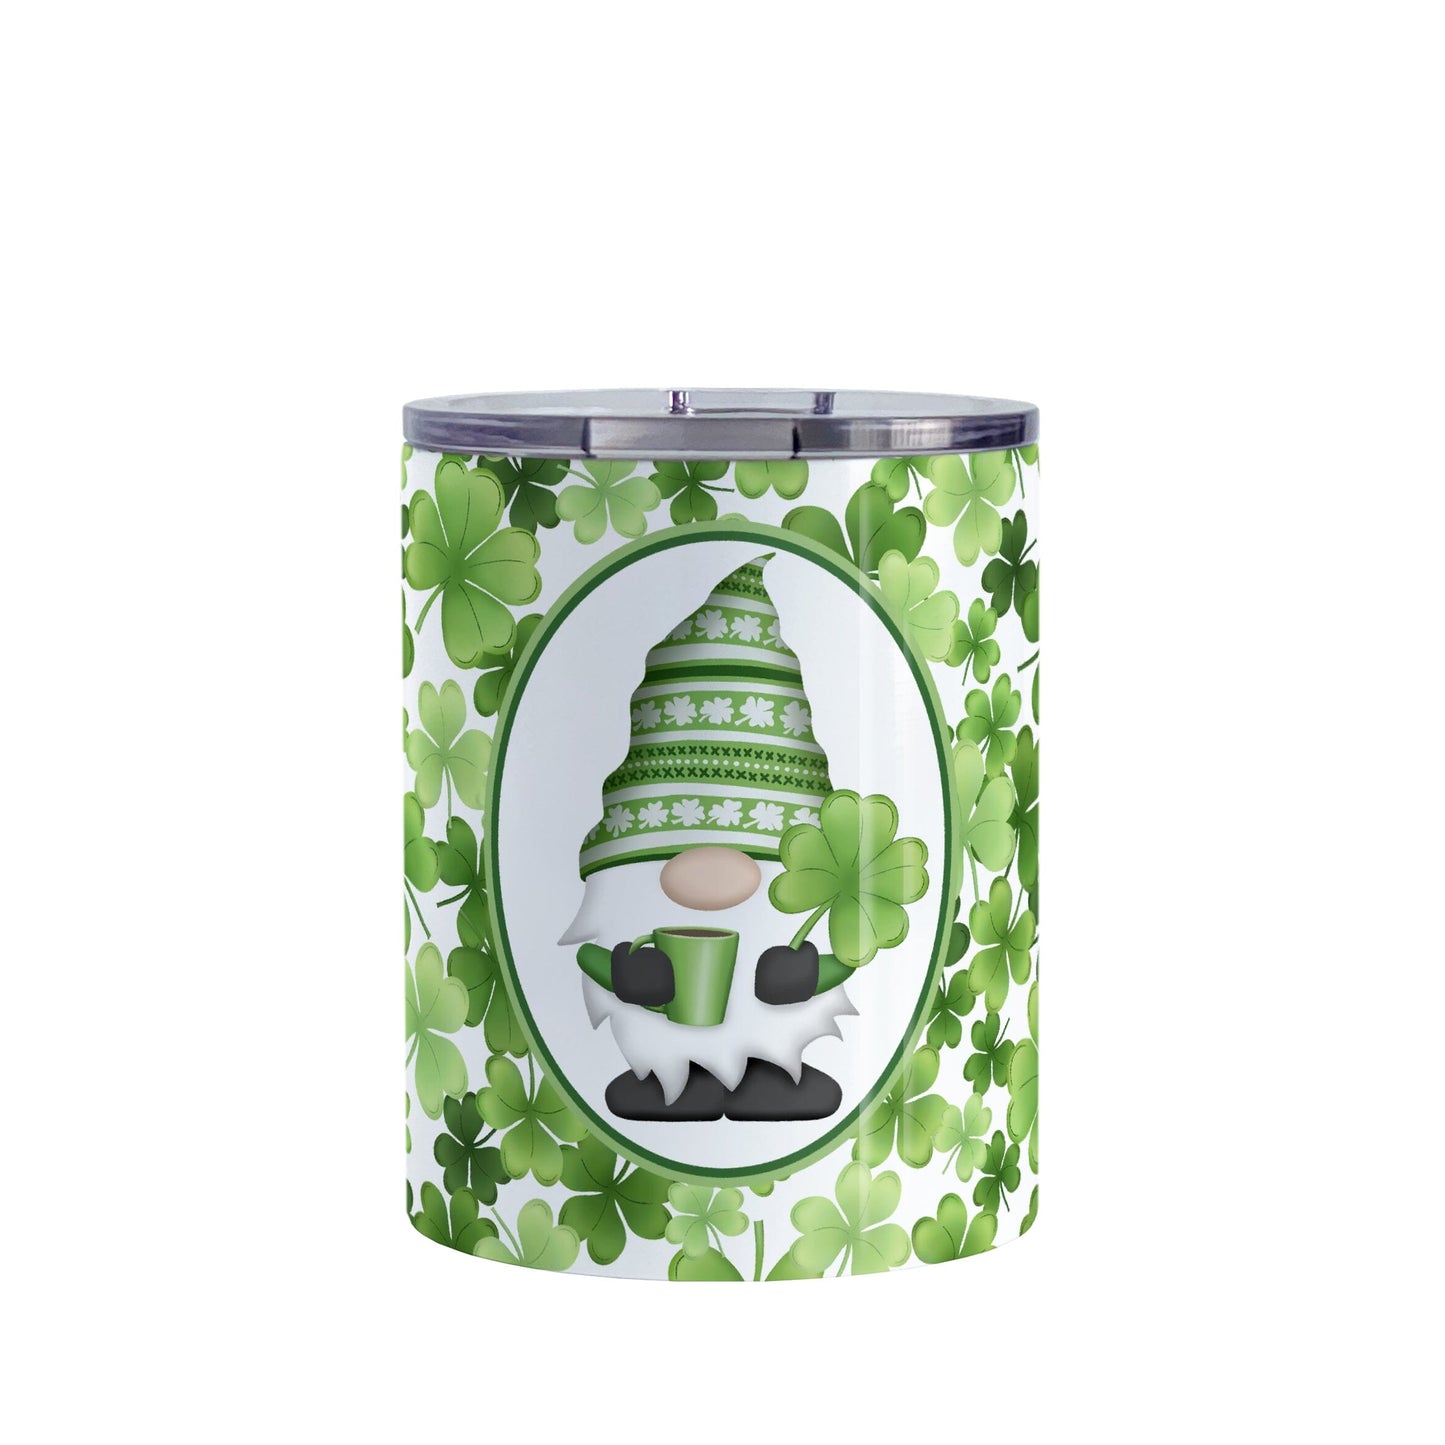 Green Gnome Shamrocks Tumbler Cup (10oz) at Amy's Coffee Mugs. A stainless steel tumbler cup designed with an adorable green hat gnome holding a 4-leaf clover and a hot beverage in a white oval over a pattern of green shamrocks in different shades of green that wrap around the cup.